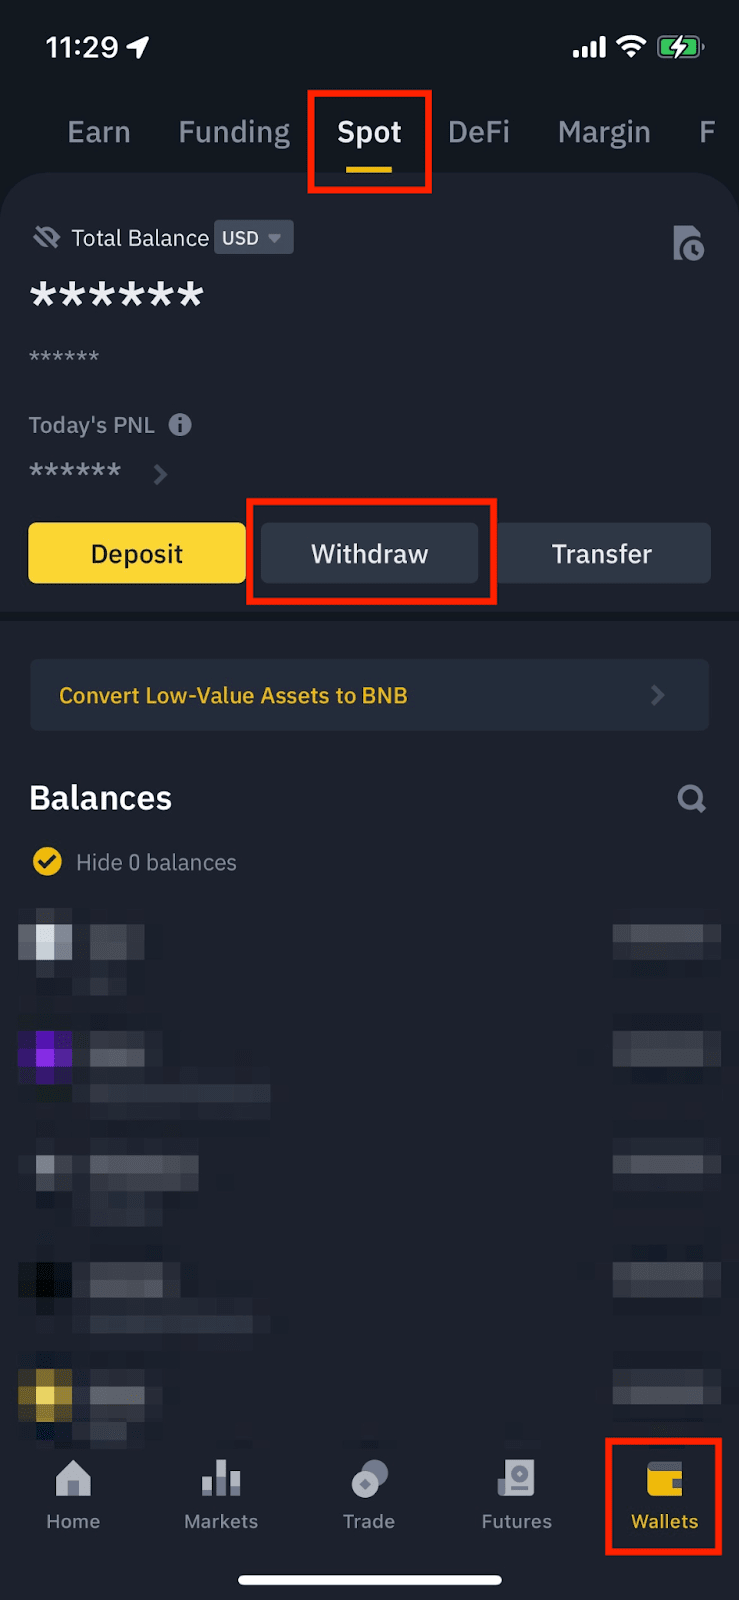 How to Withdraw from Binance - Beginner's Guide in 